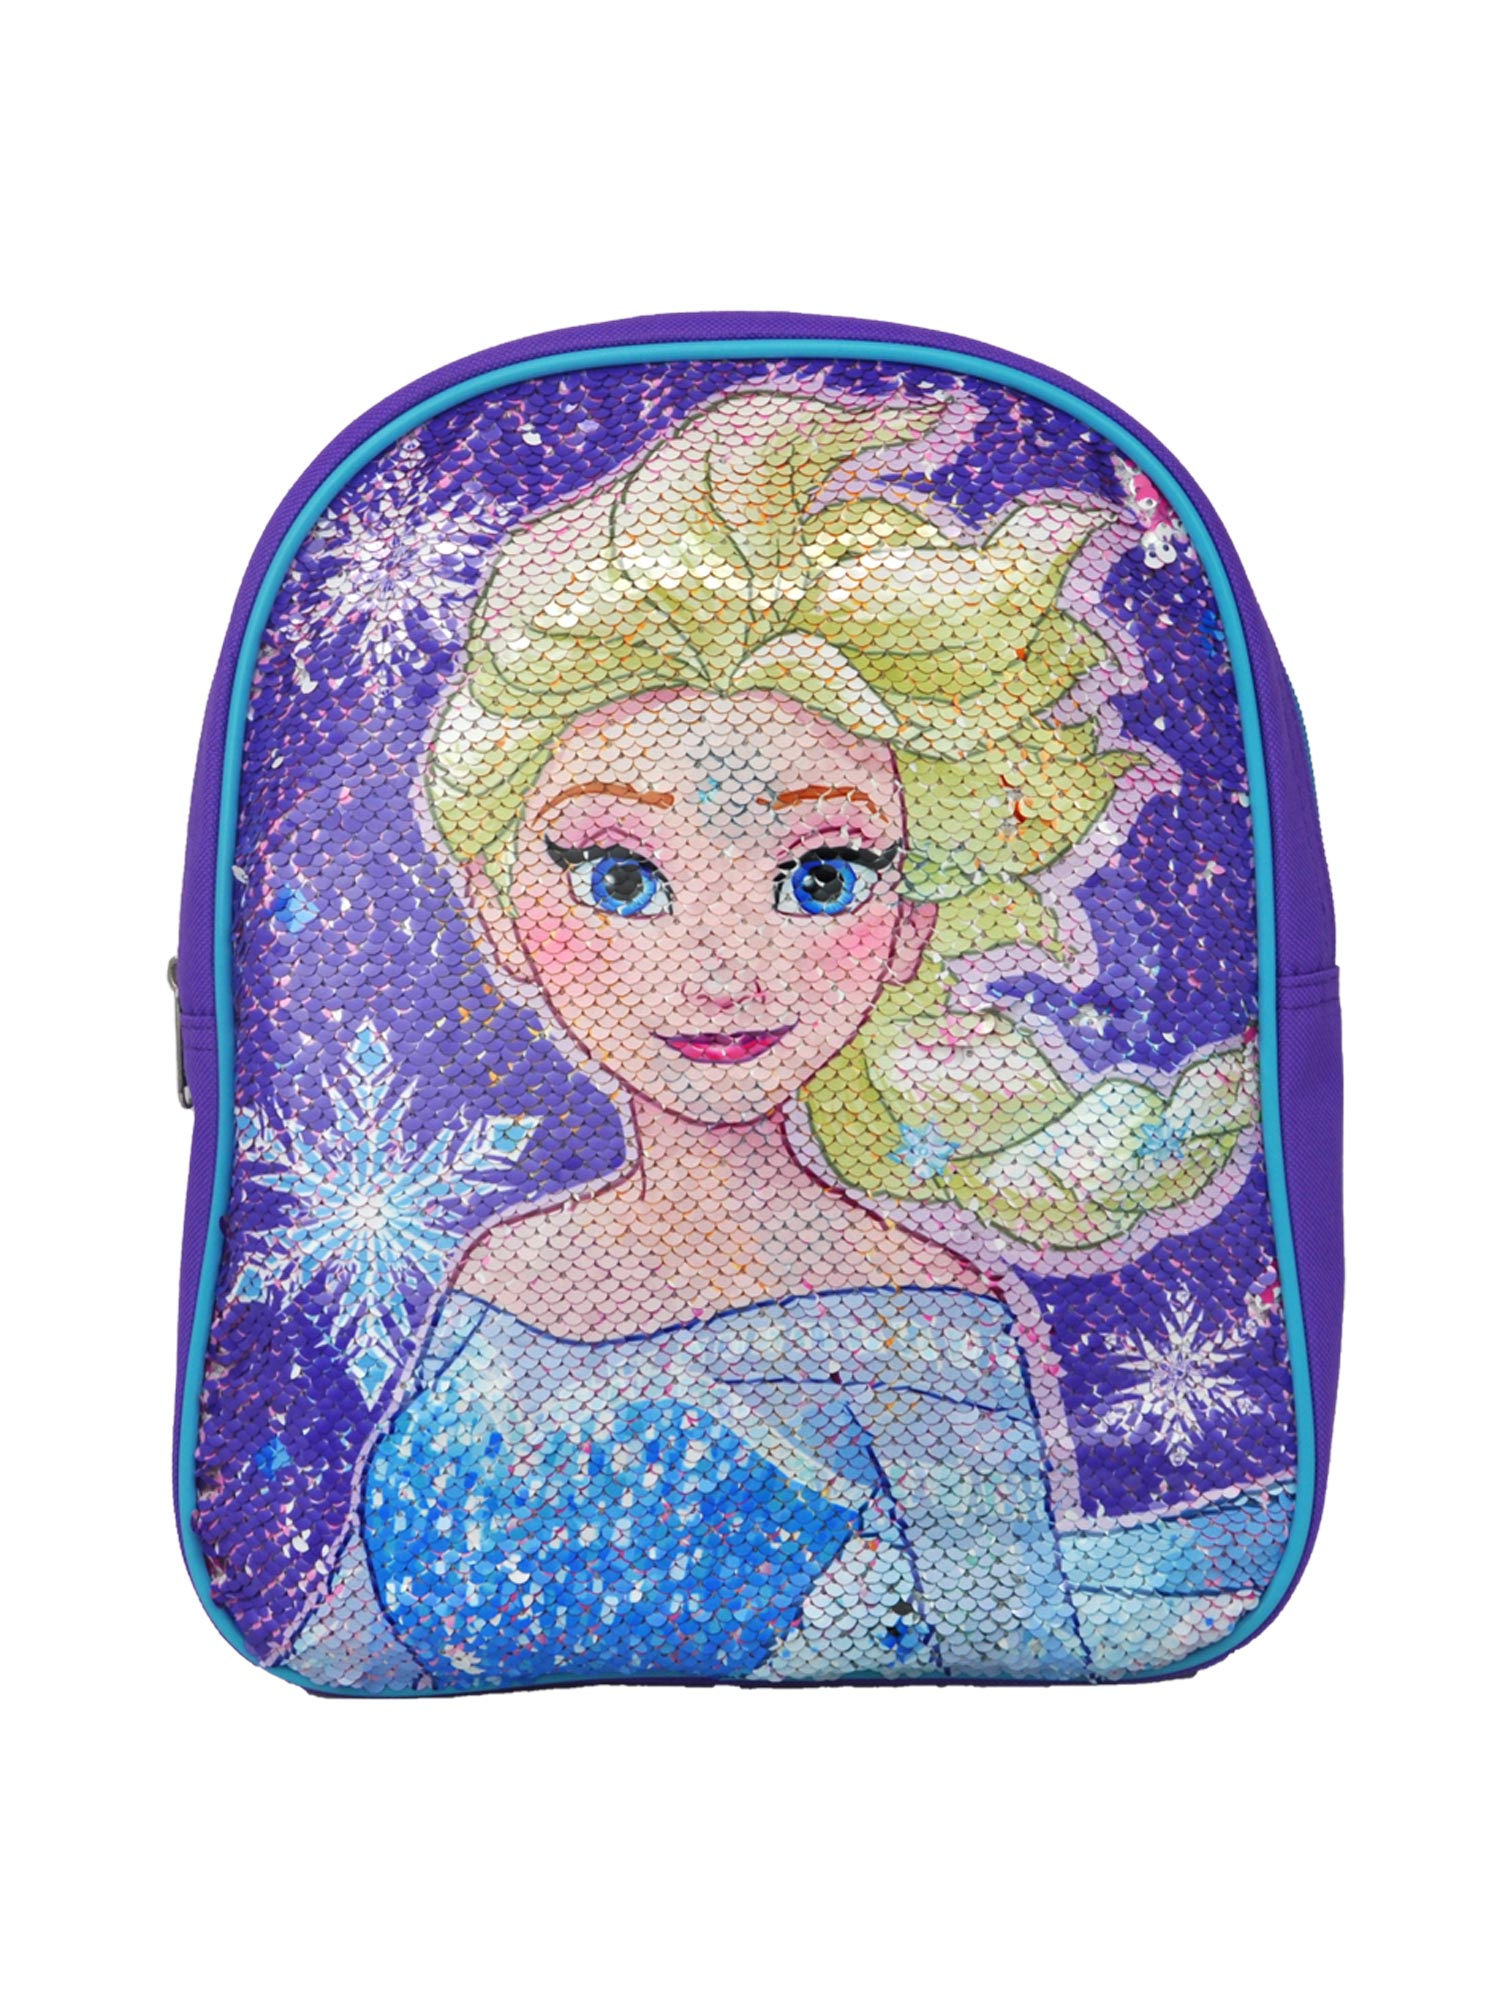 Frozen Girls 12" Small Backpack with Reversible Sequins Elsa Anna Purple - image 1 of 4